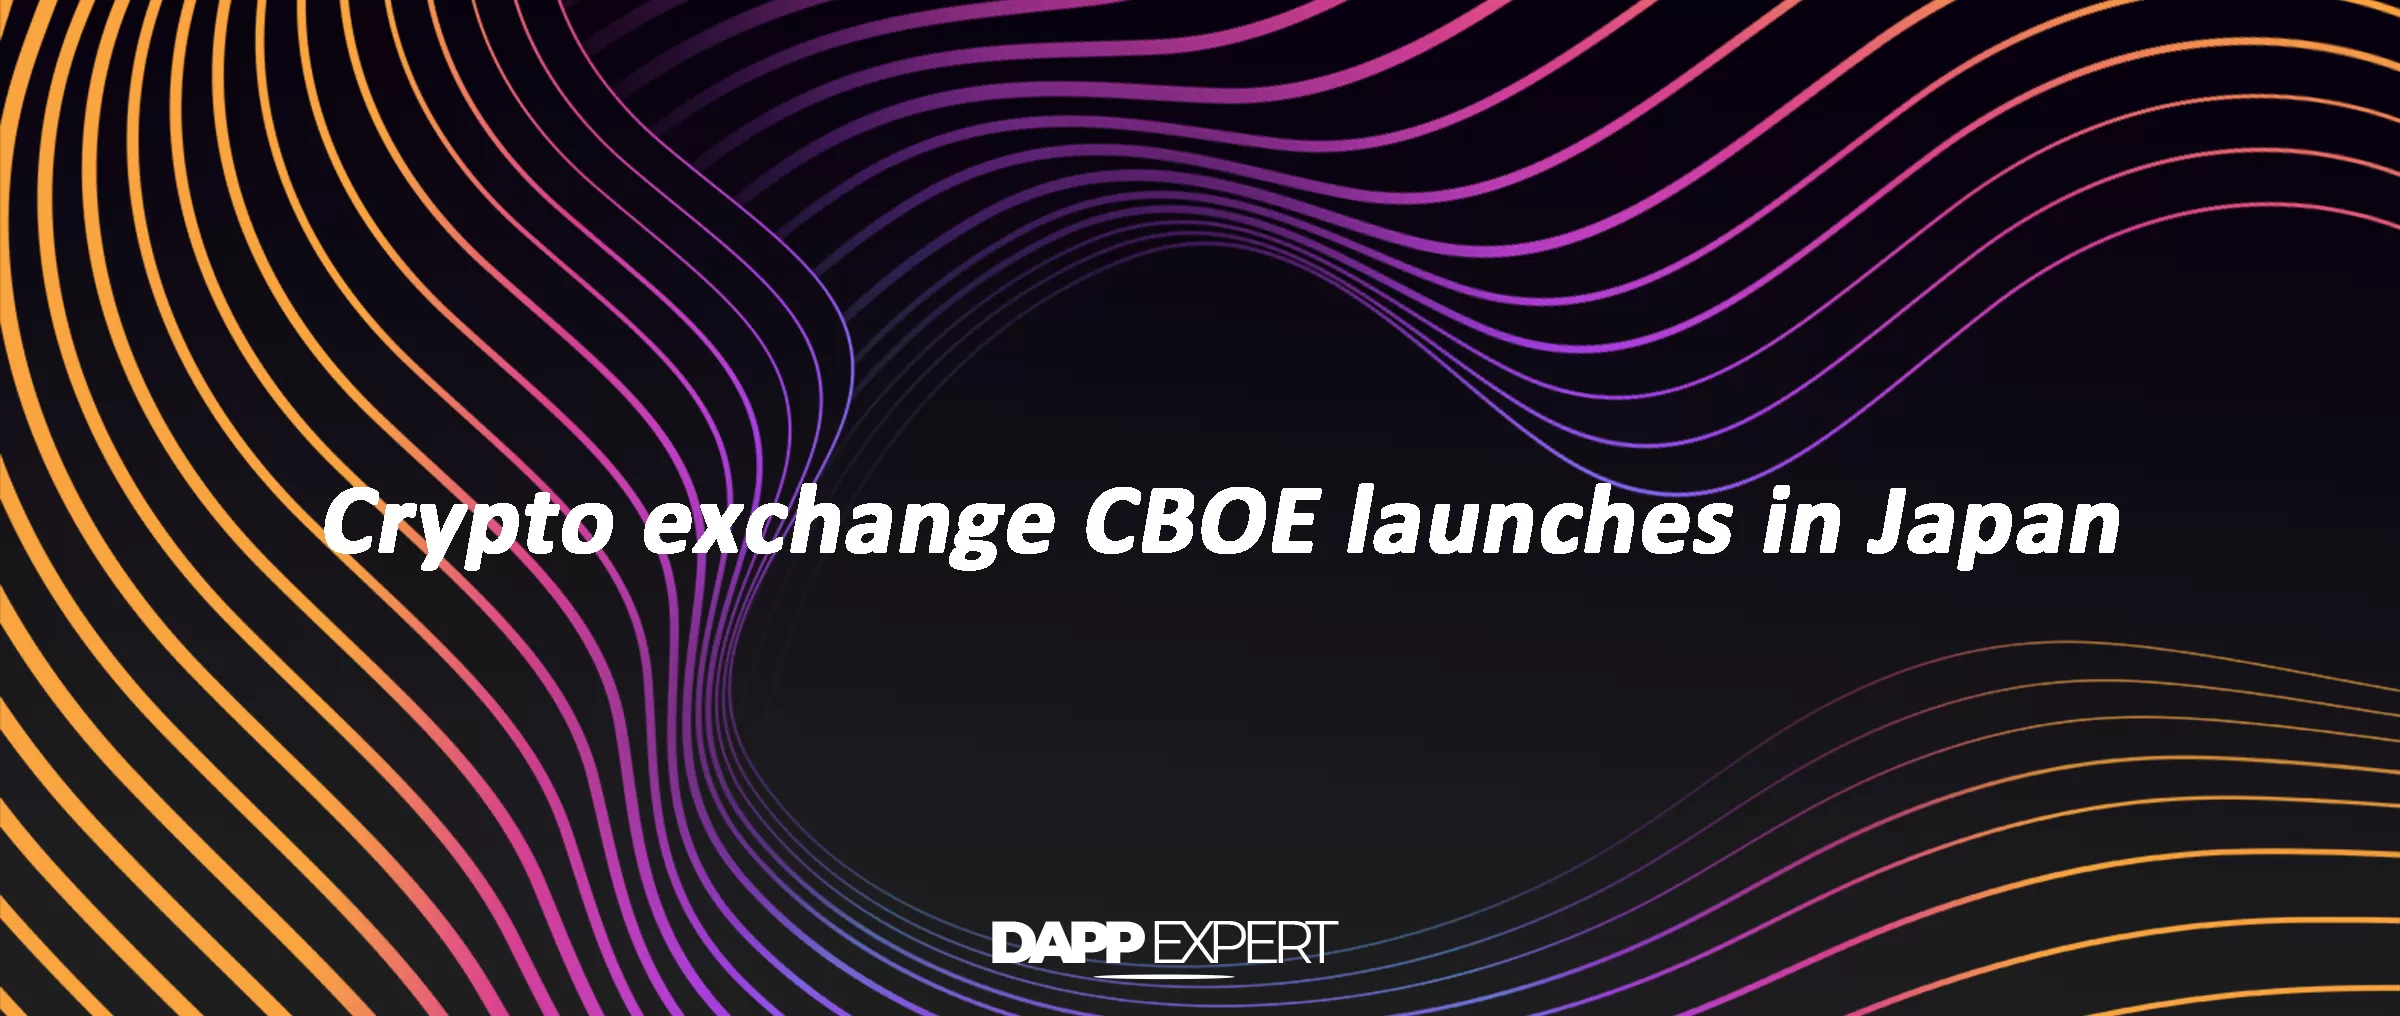 Crypto exchange CBOE launches in Japan